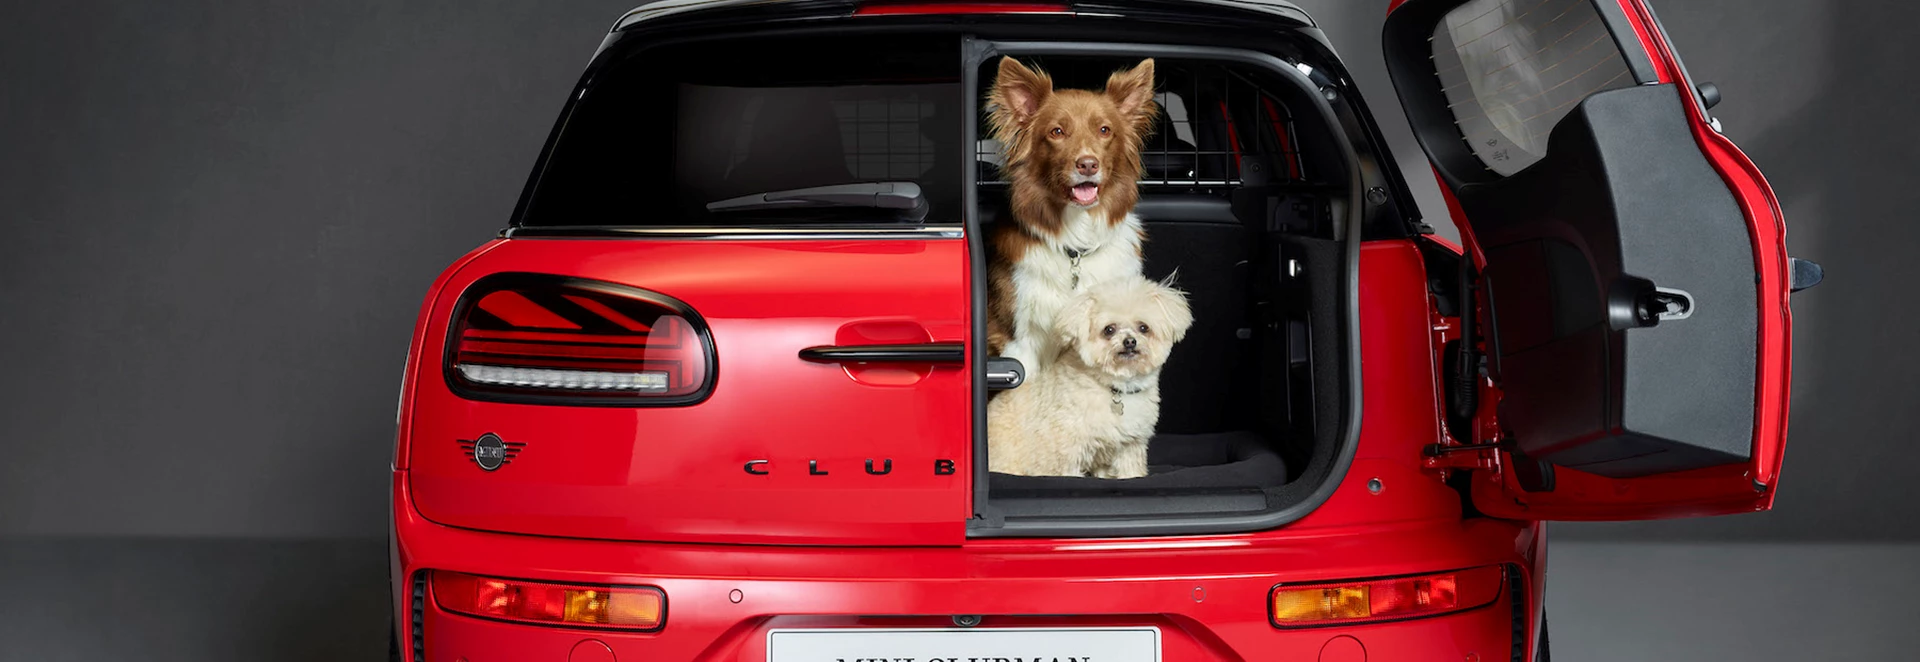 Mini offers top tips for carrying dogs safely in the car 